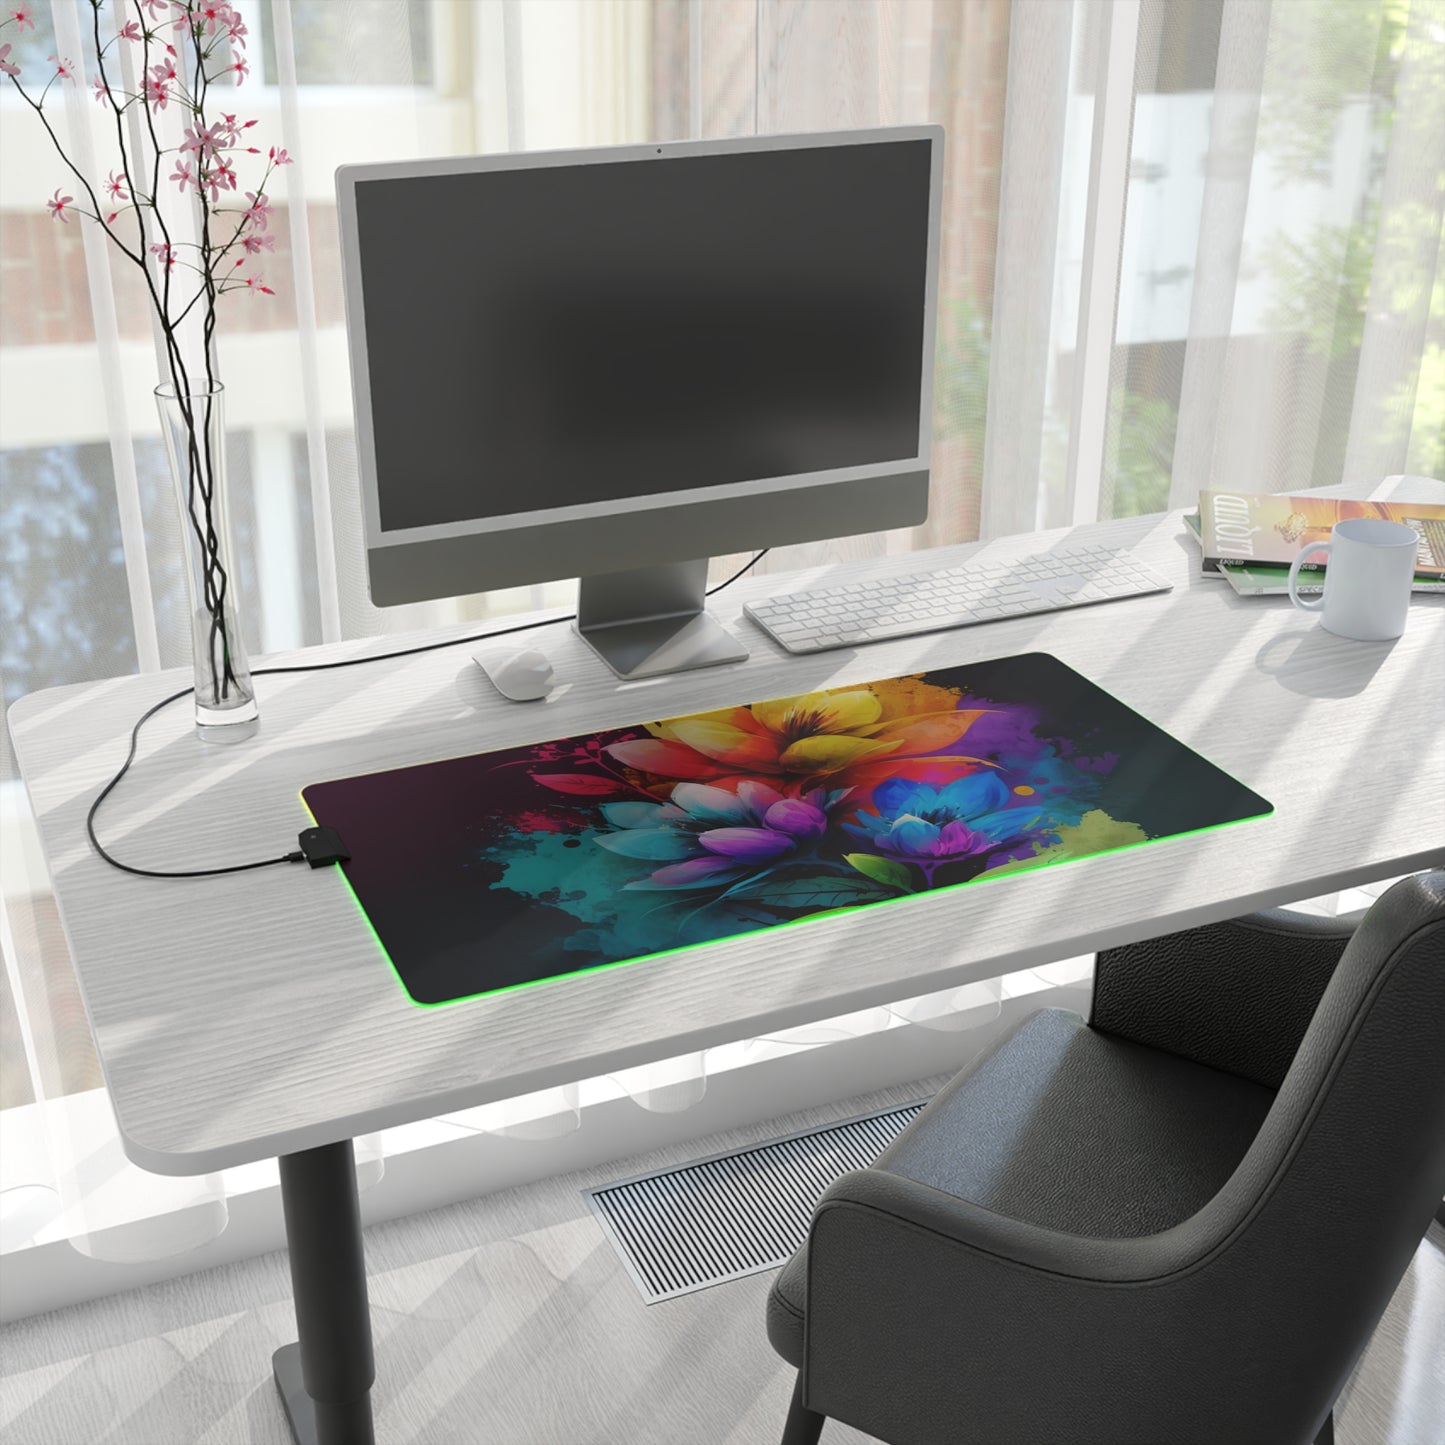 LED Gaming Mouse Pad Bright Spring Flowers 3